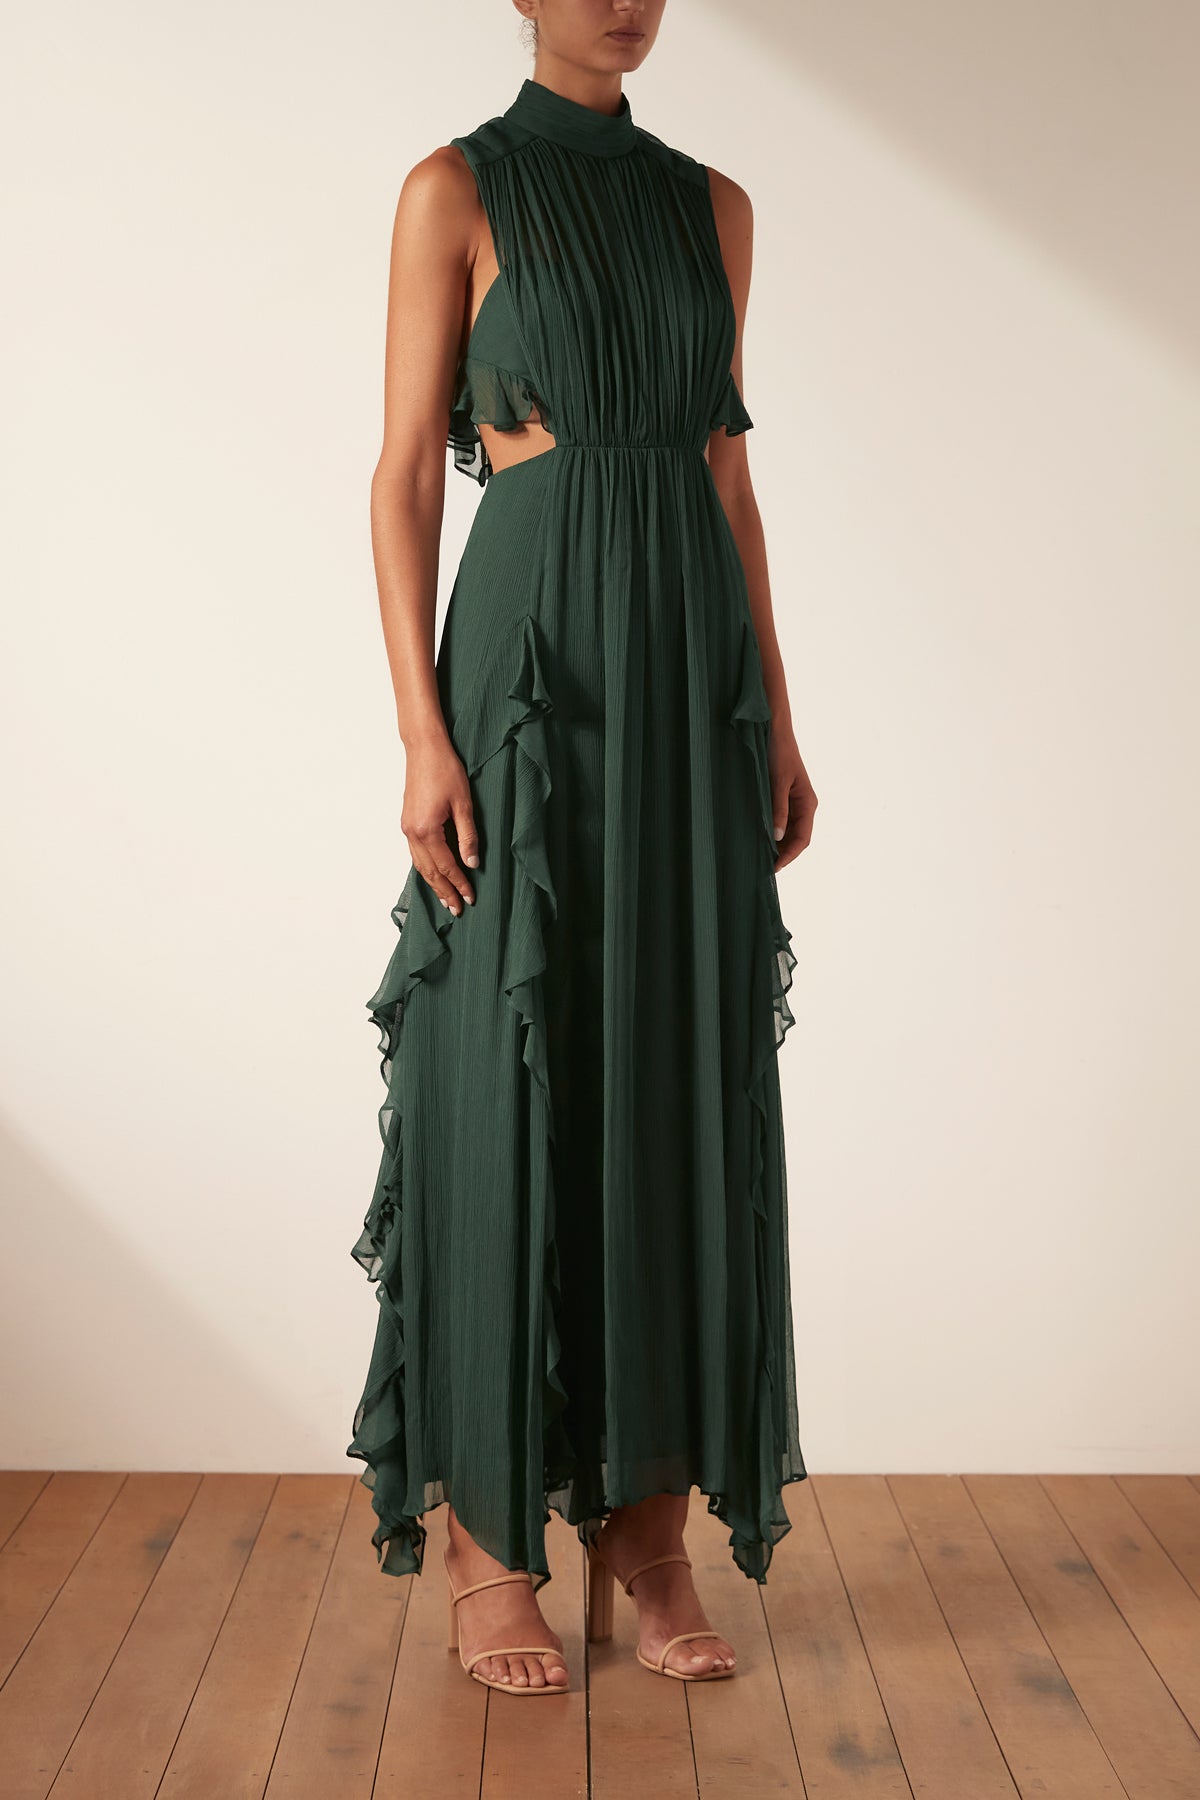 Lèonie Backless Frill Maxi Dress, Rosemary, Dresses